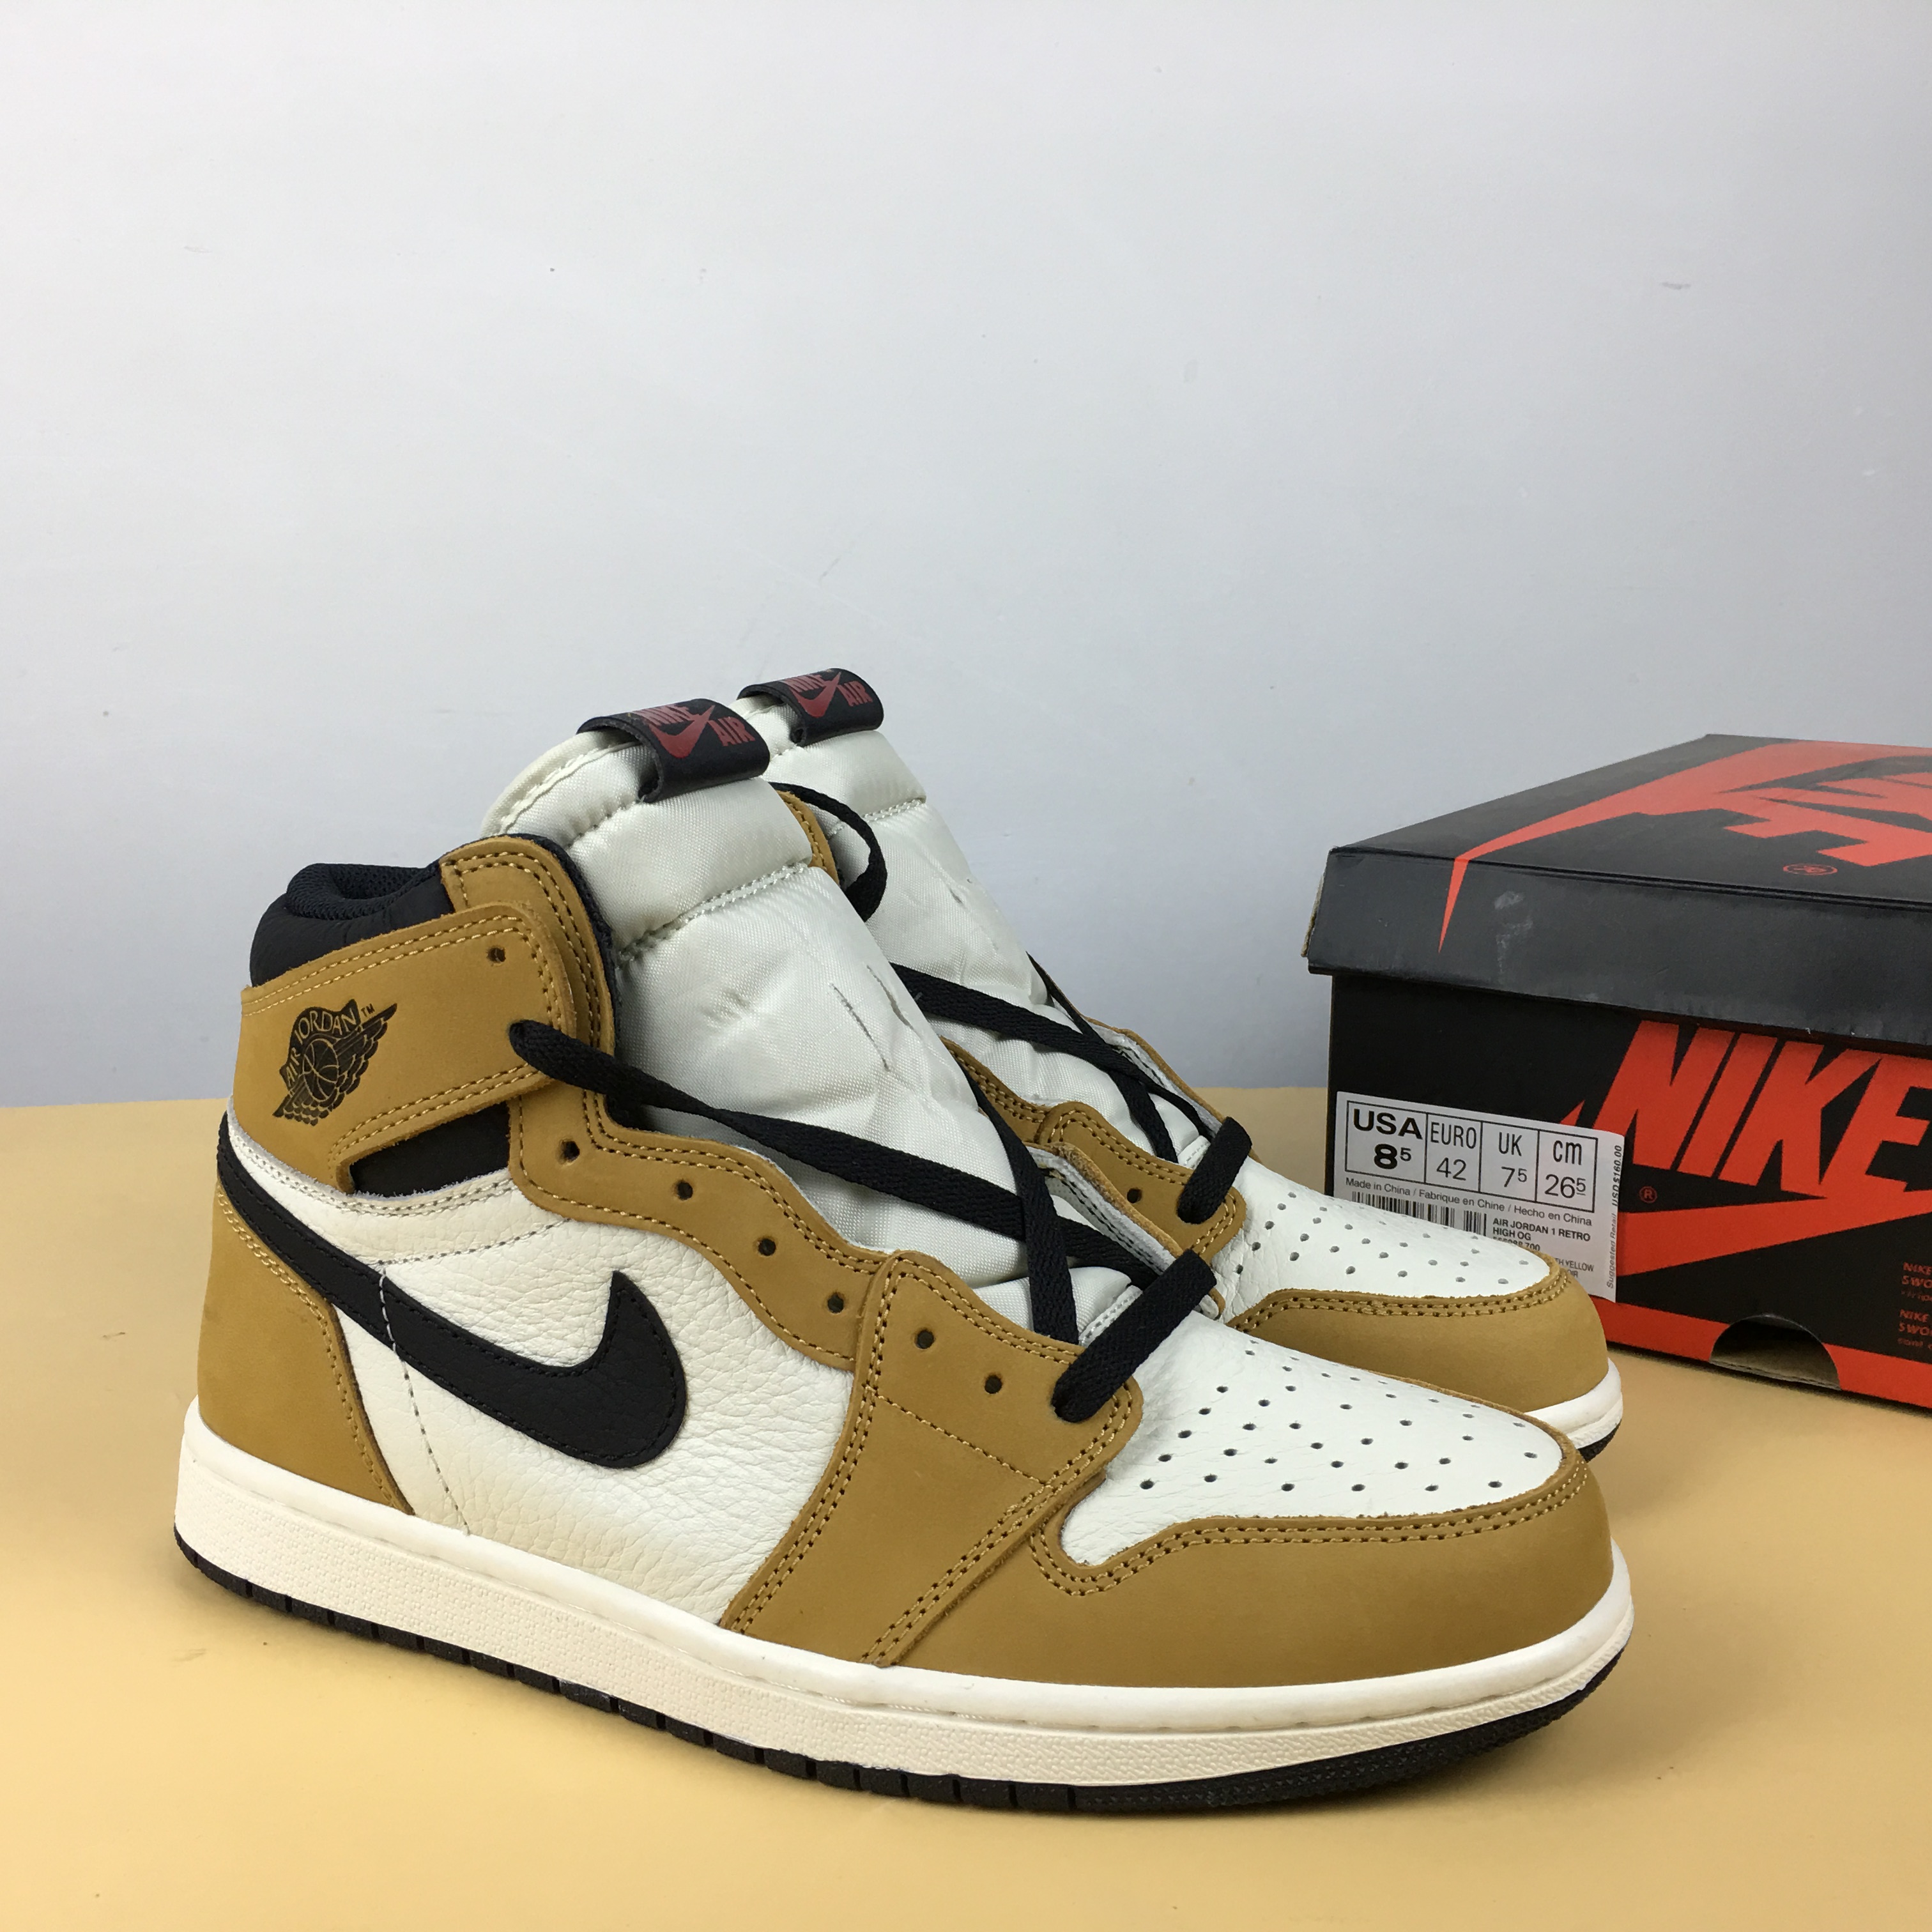 New Air Jordan 1 Rookie of the Year Wheat Yellow White Black Shoes